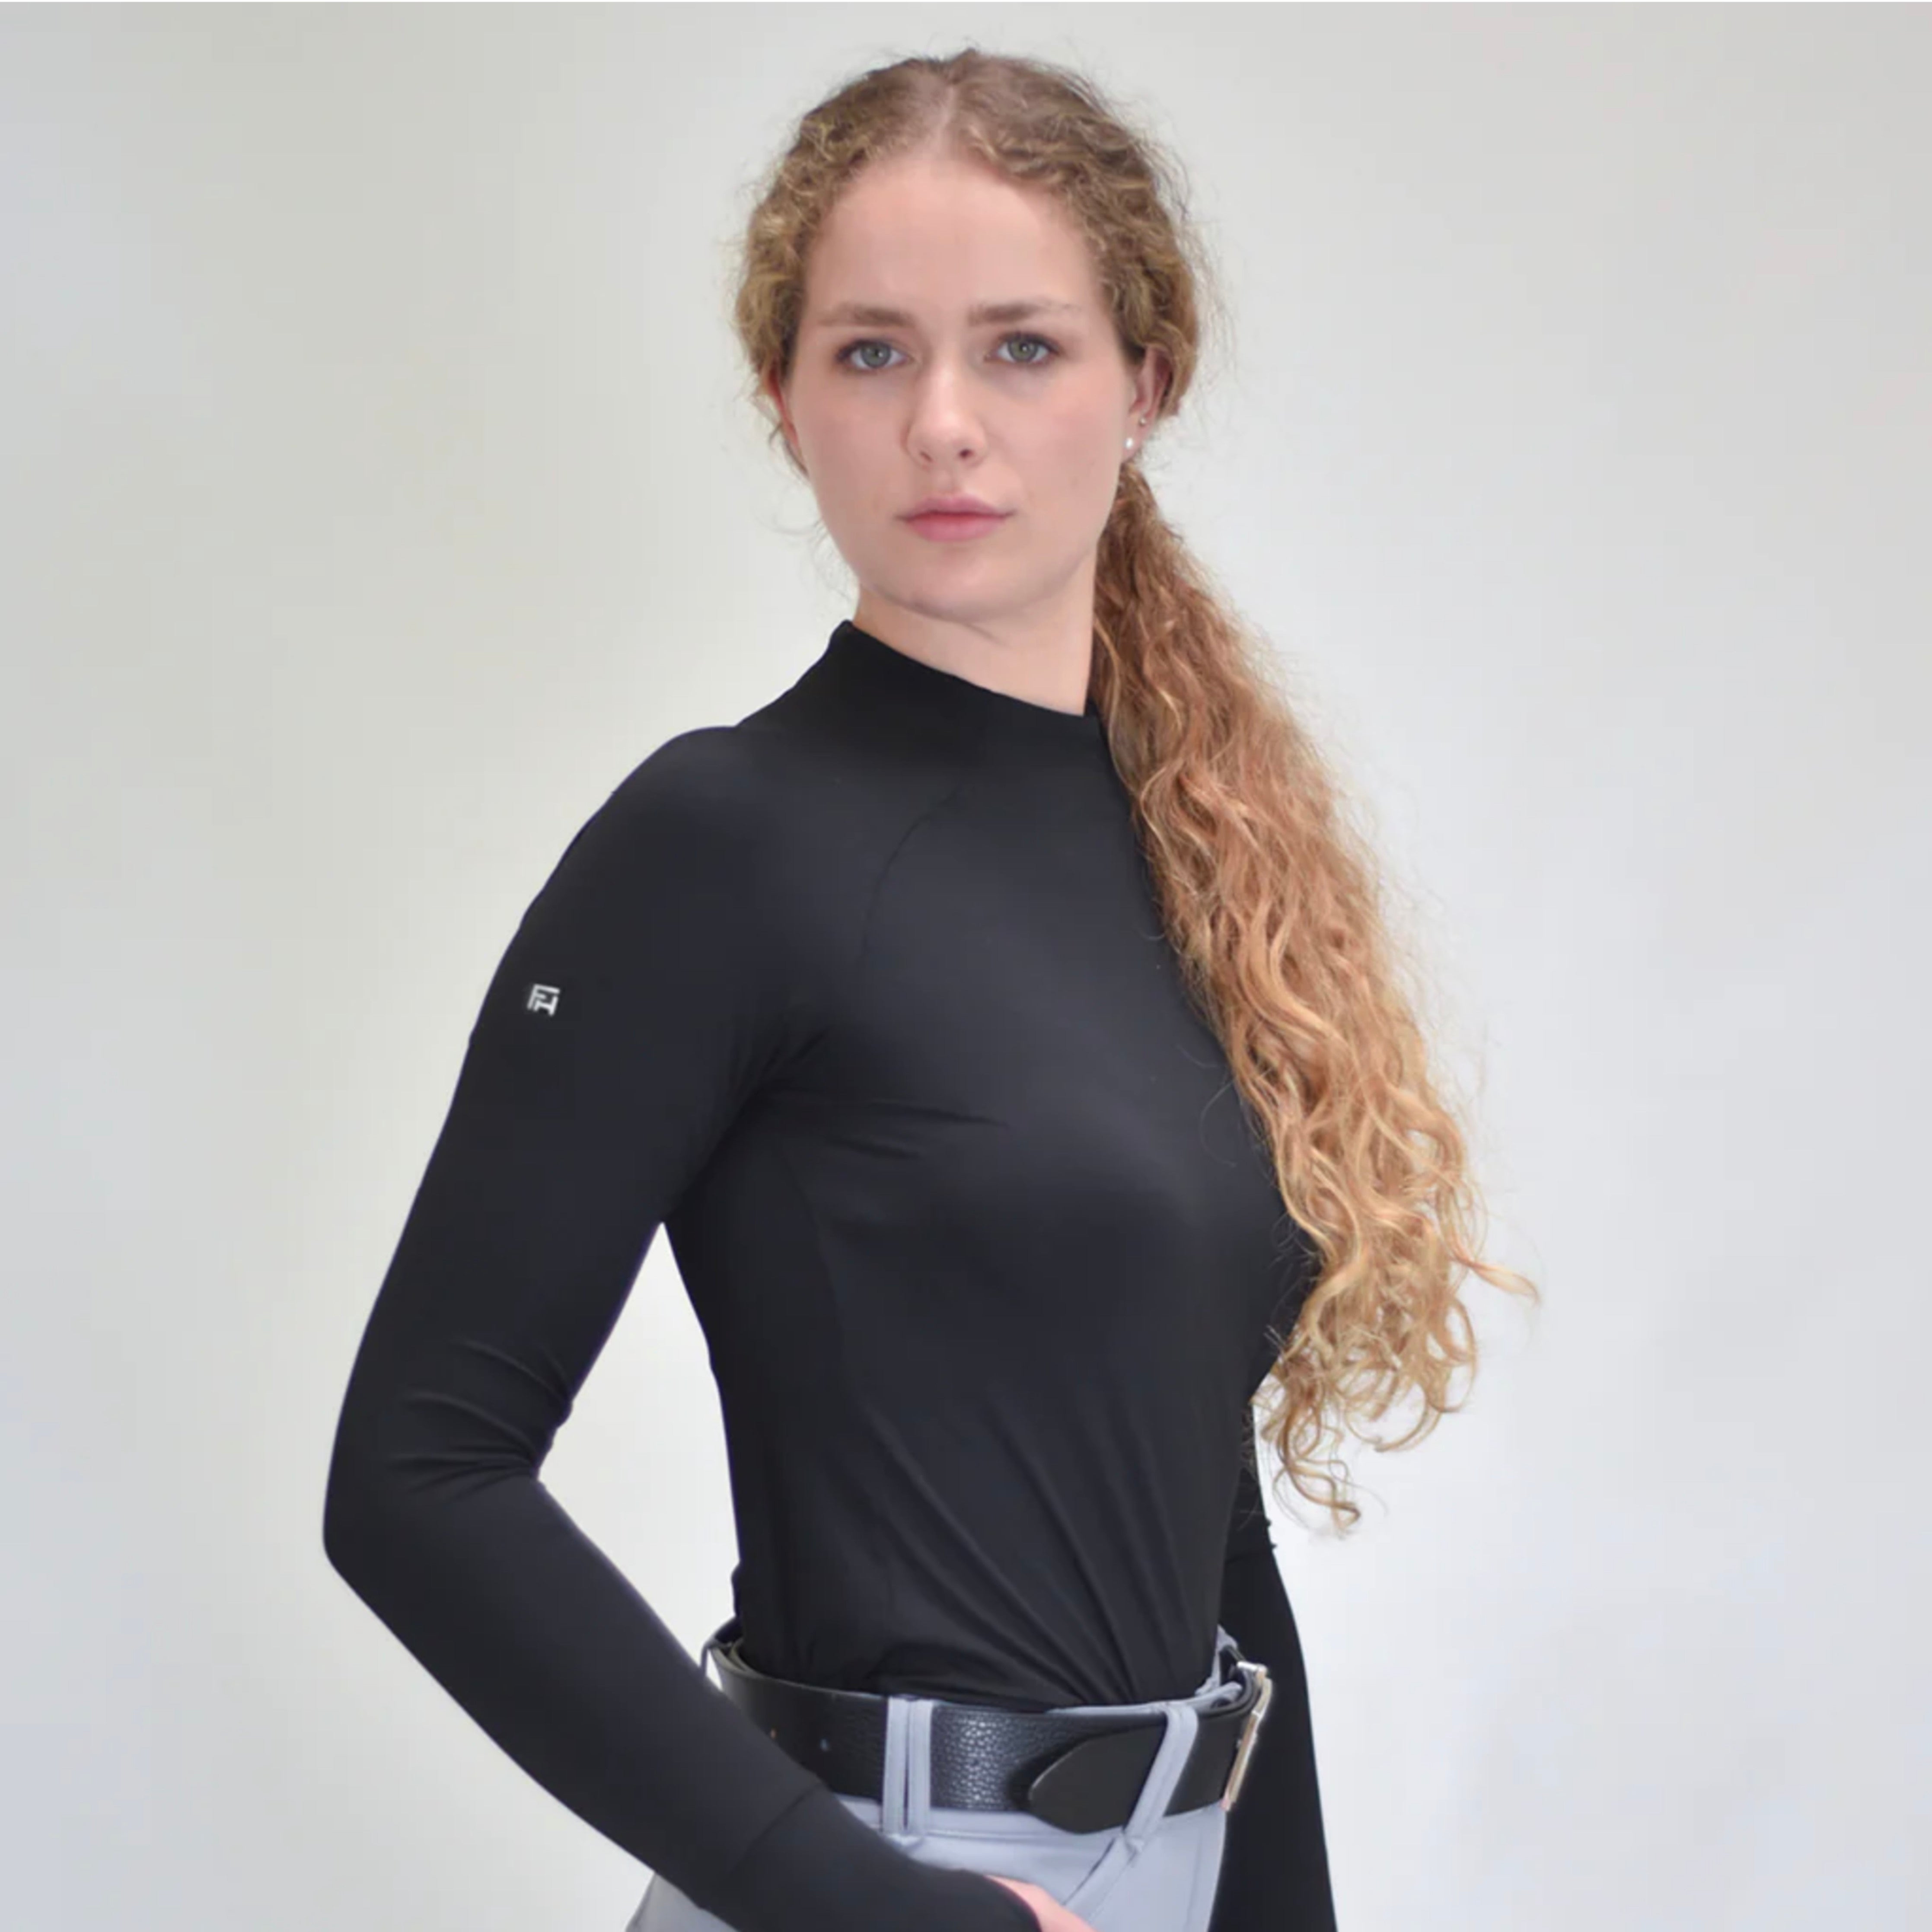 For Horses Wally Tech Mockneck ladies